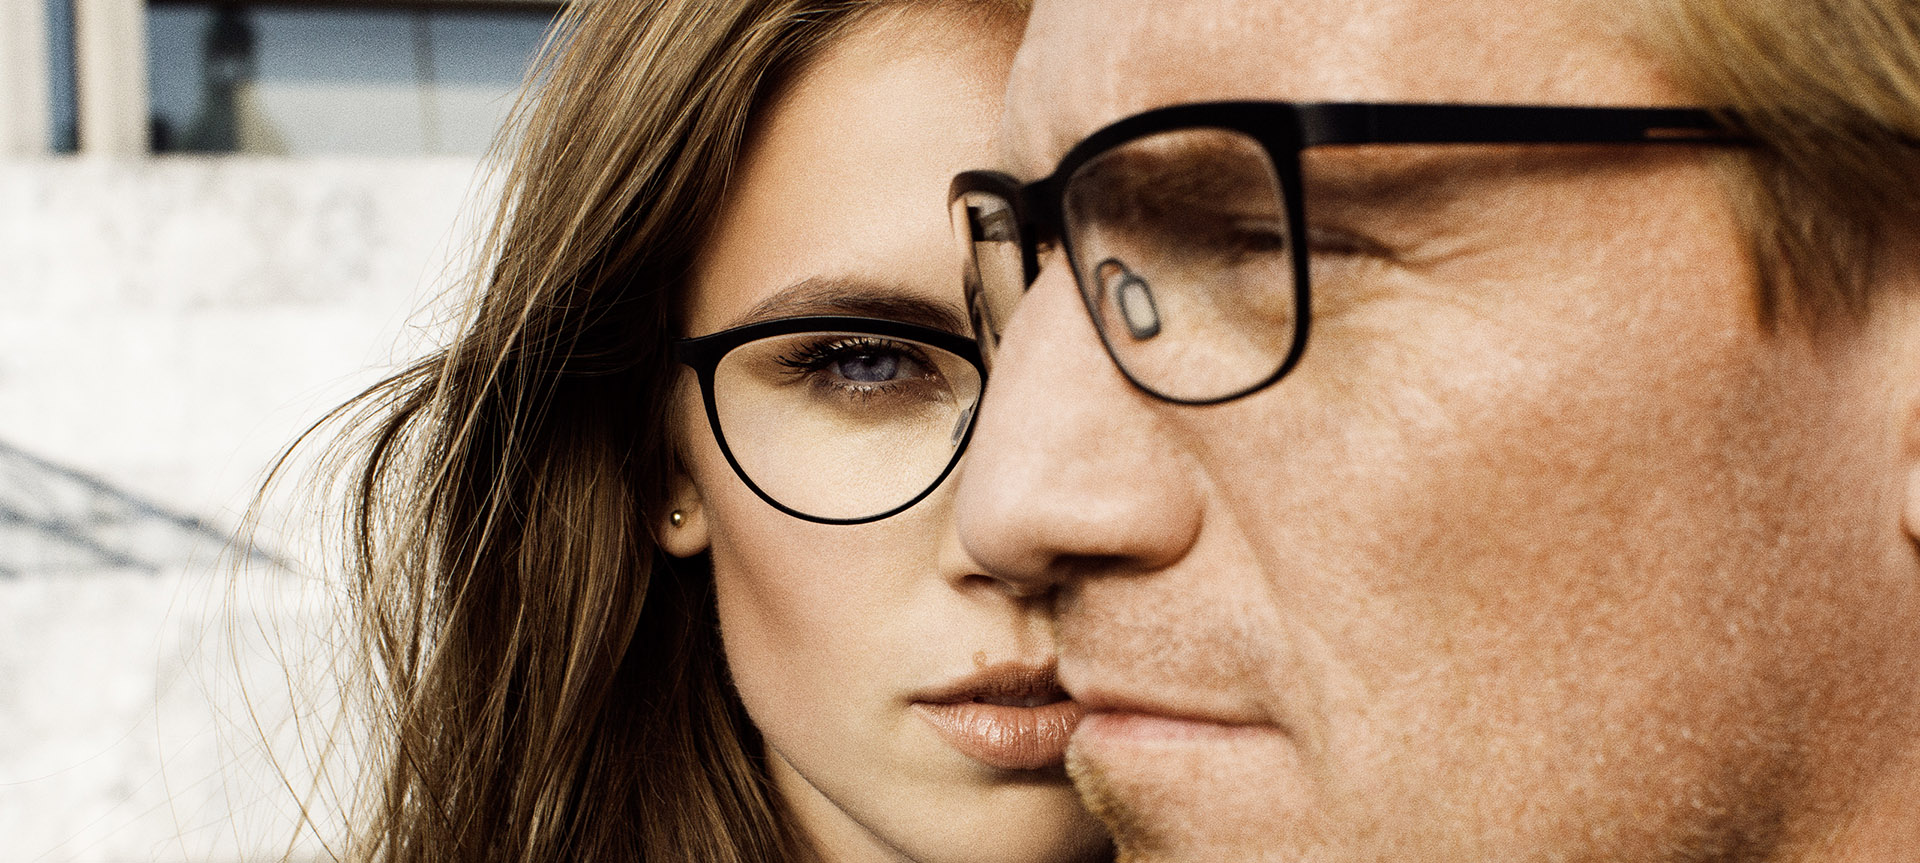 Orgreen, Lunettes, Couple, The House of Eyewear, Paris